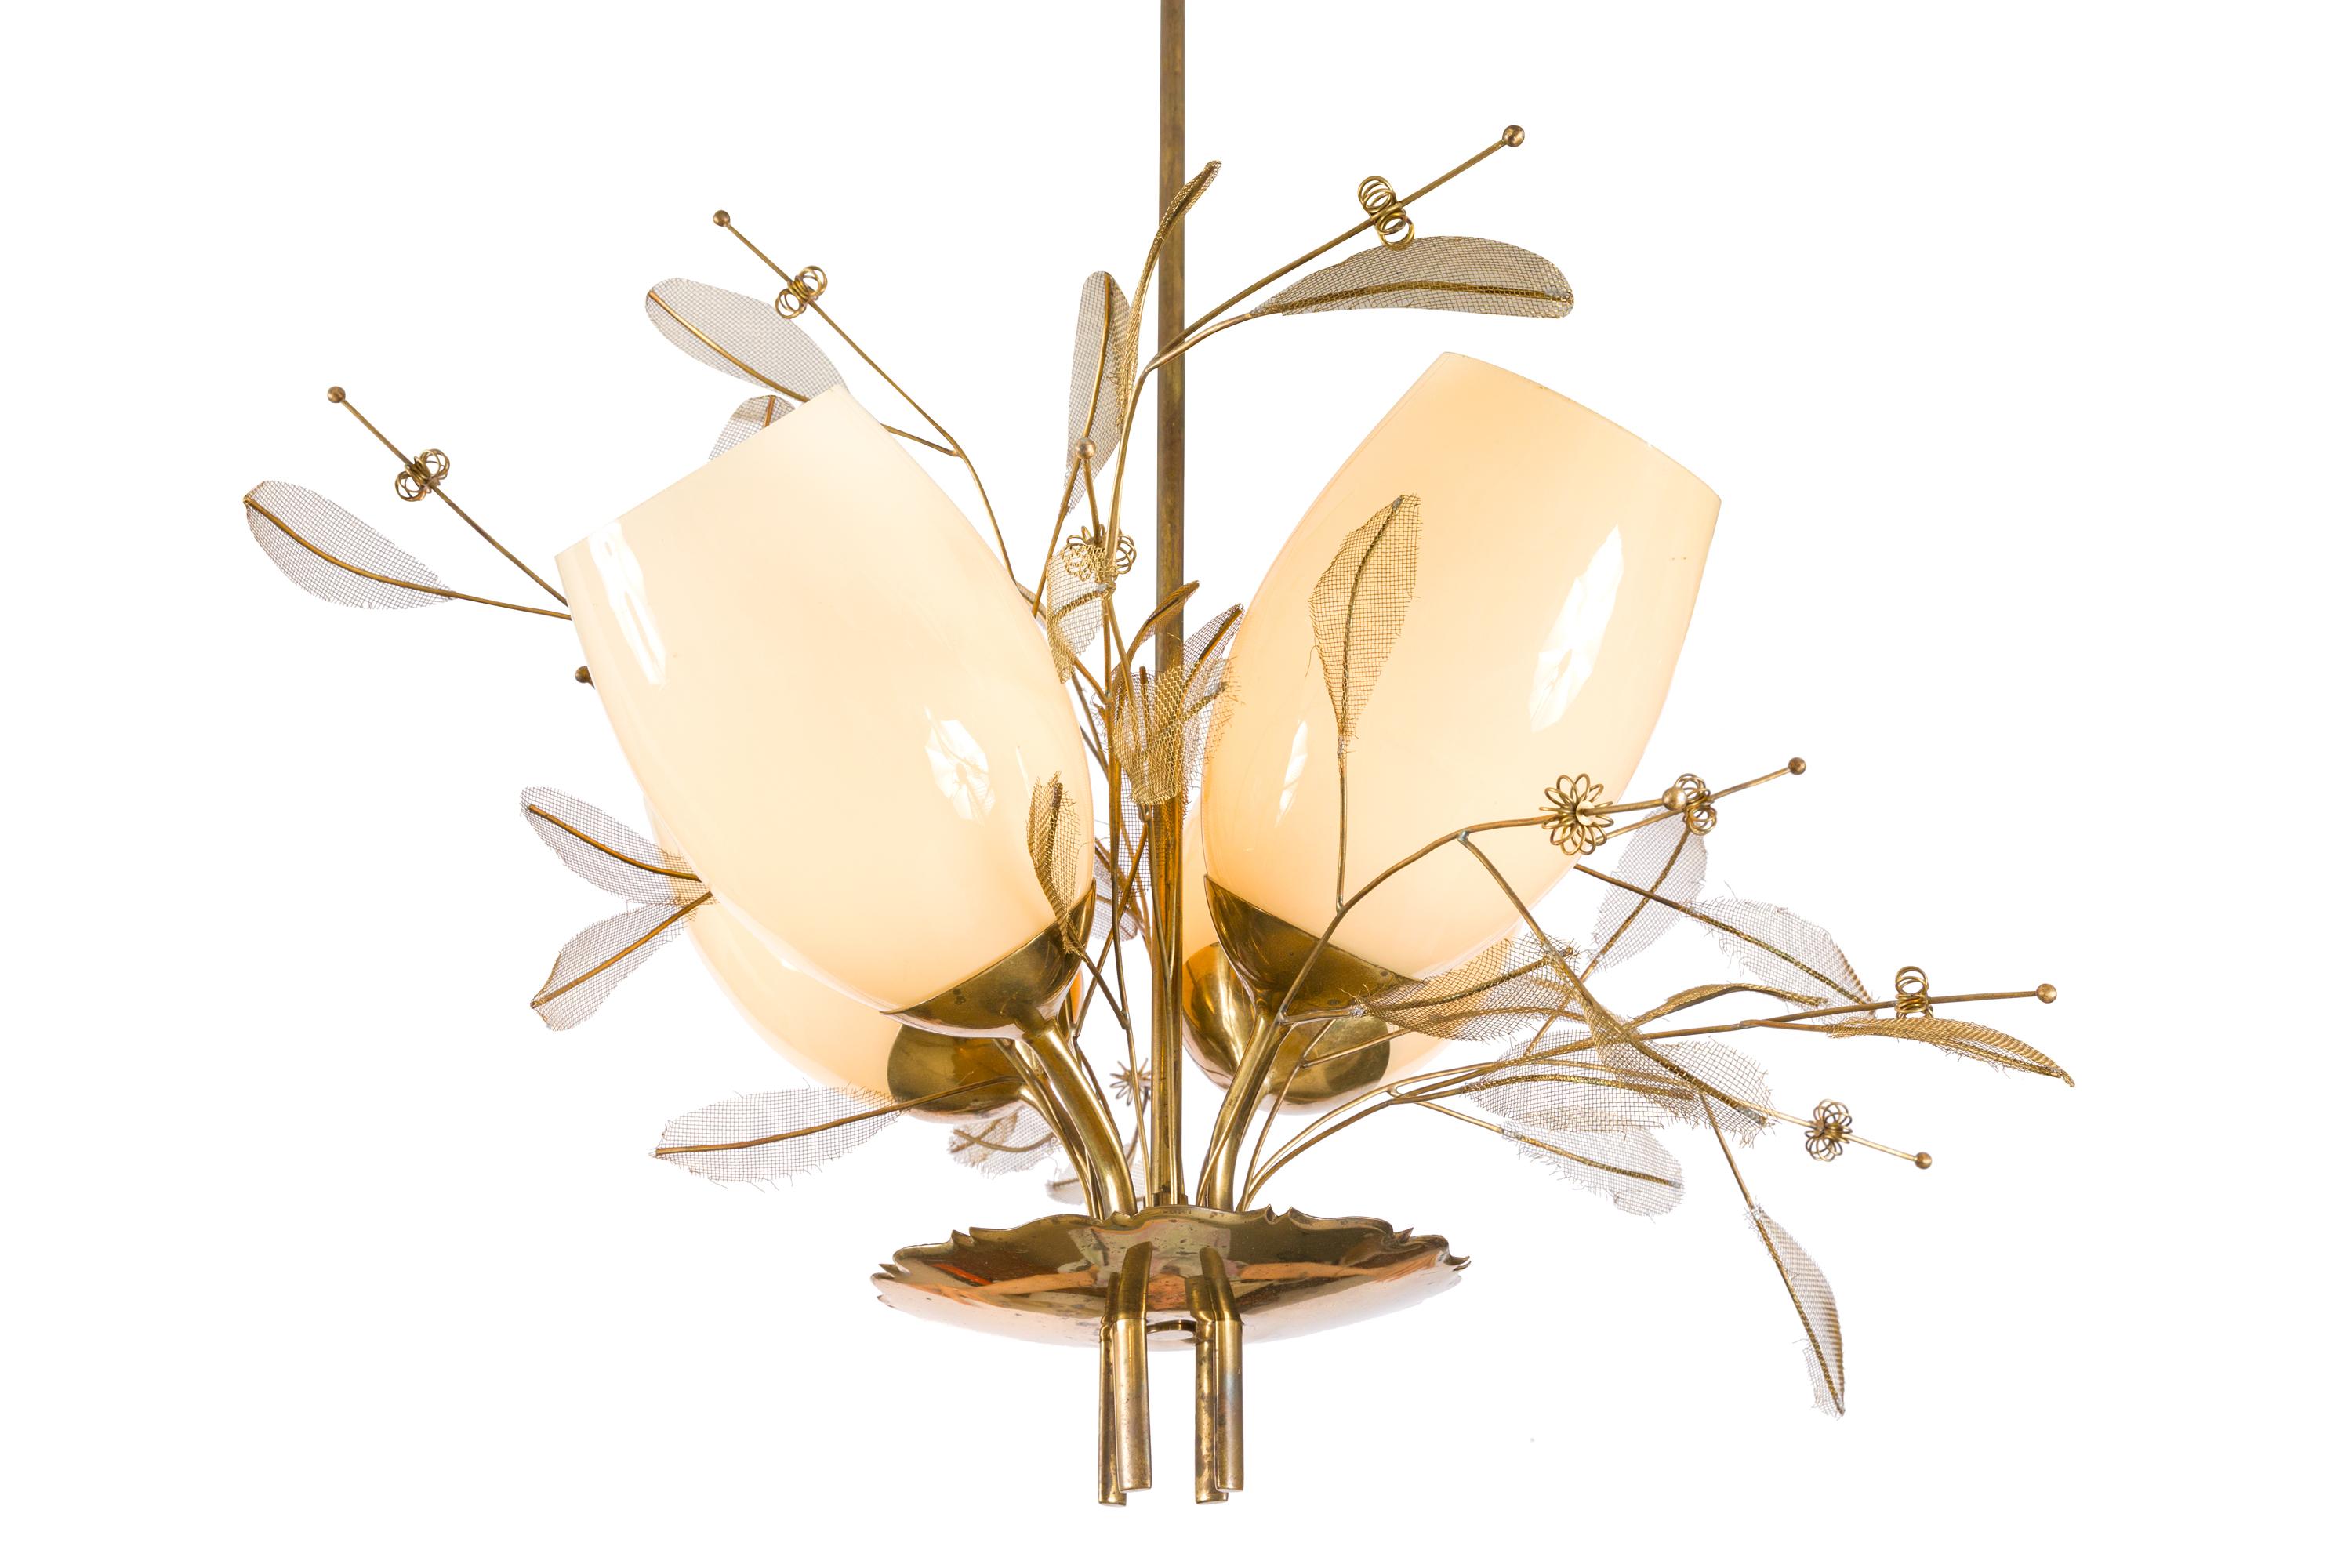 A Classic Tynell chandelier with the distinctive brass floral decoration. Paavo Viljo Tynell was a Finnish designer who is best known for his lighting fixtures and lamps. Among other things, Tynell designed the lighting for the office of the